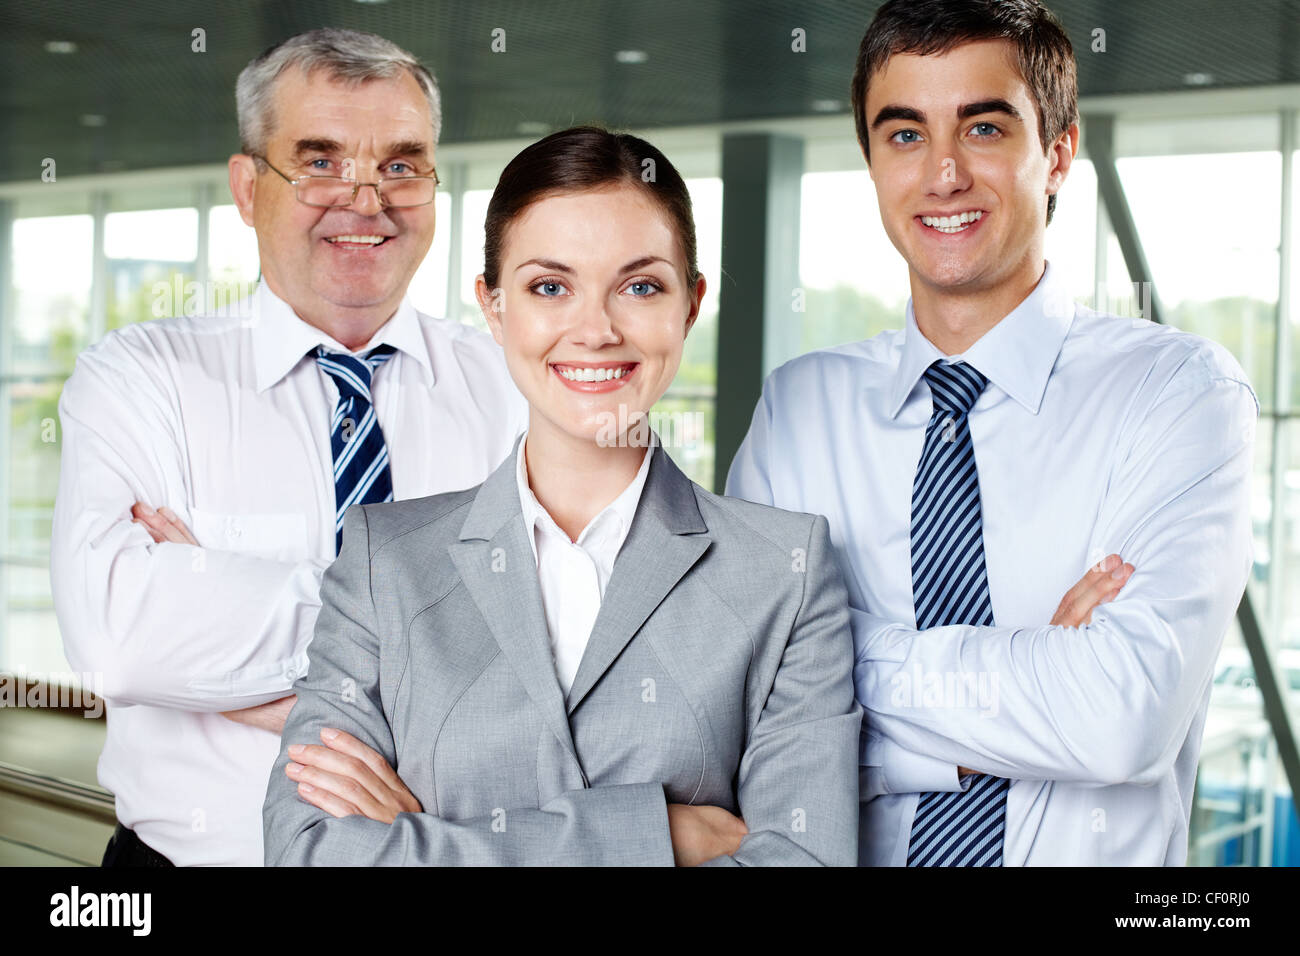 Three smiling business people looking confidently at camera Stock Photo